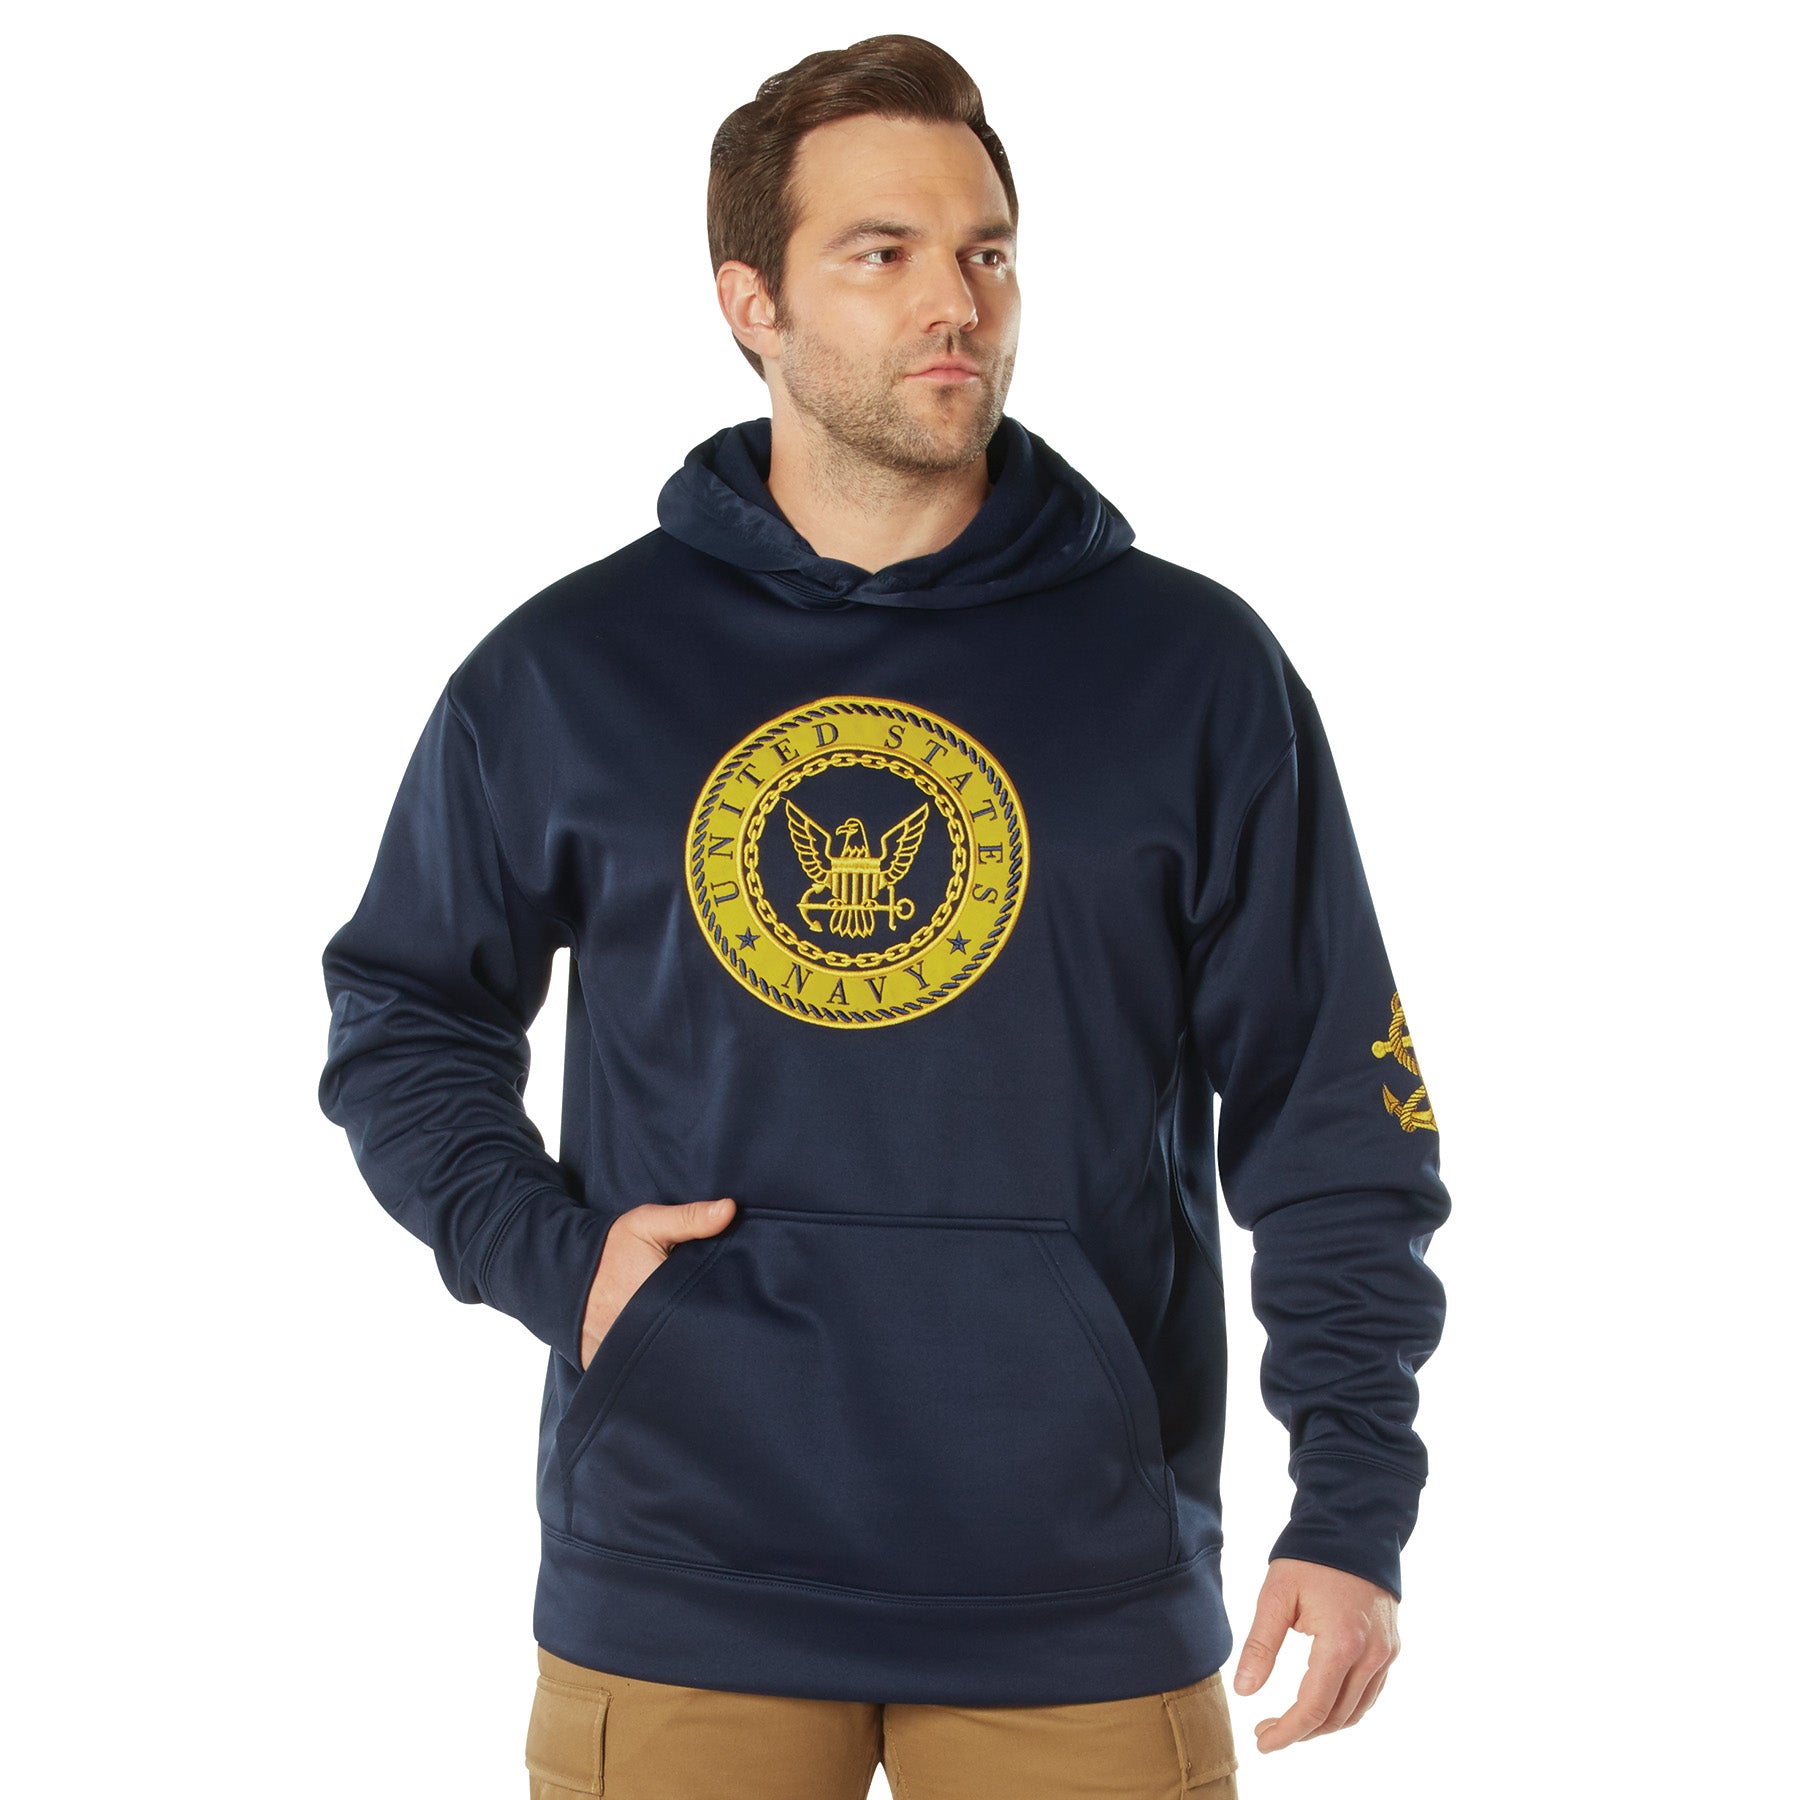 Navy Emblem Pullover Hooded Sweatshirt - Tactical Choice Plus